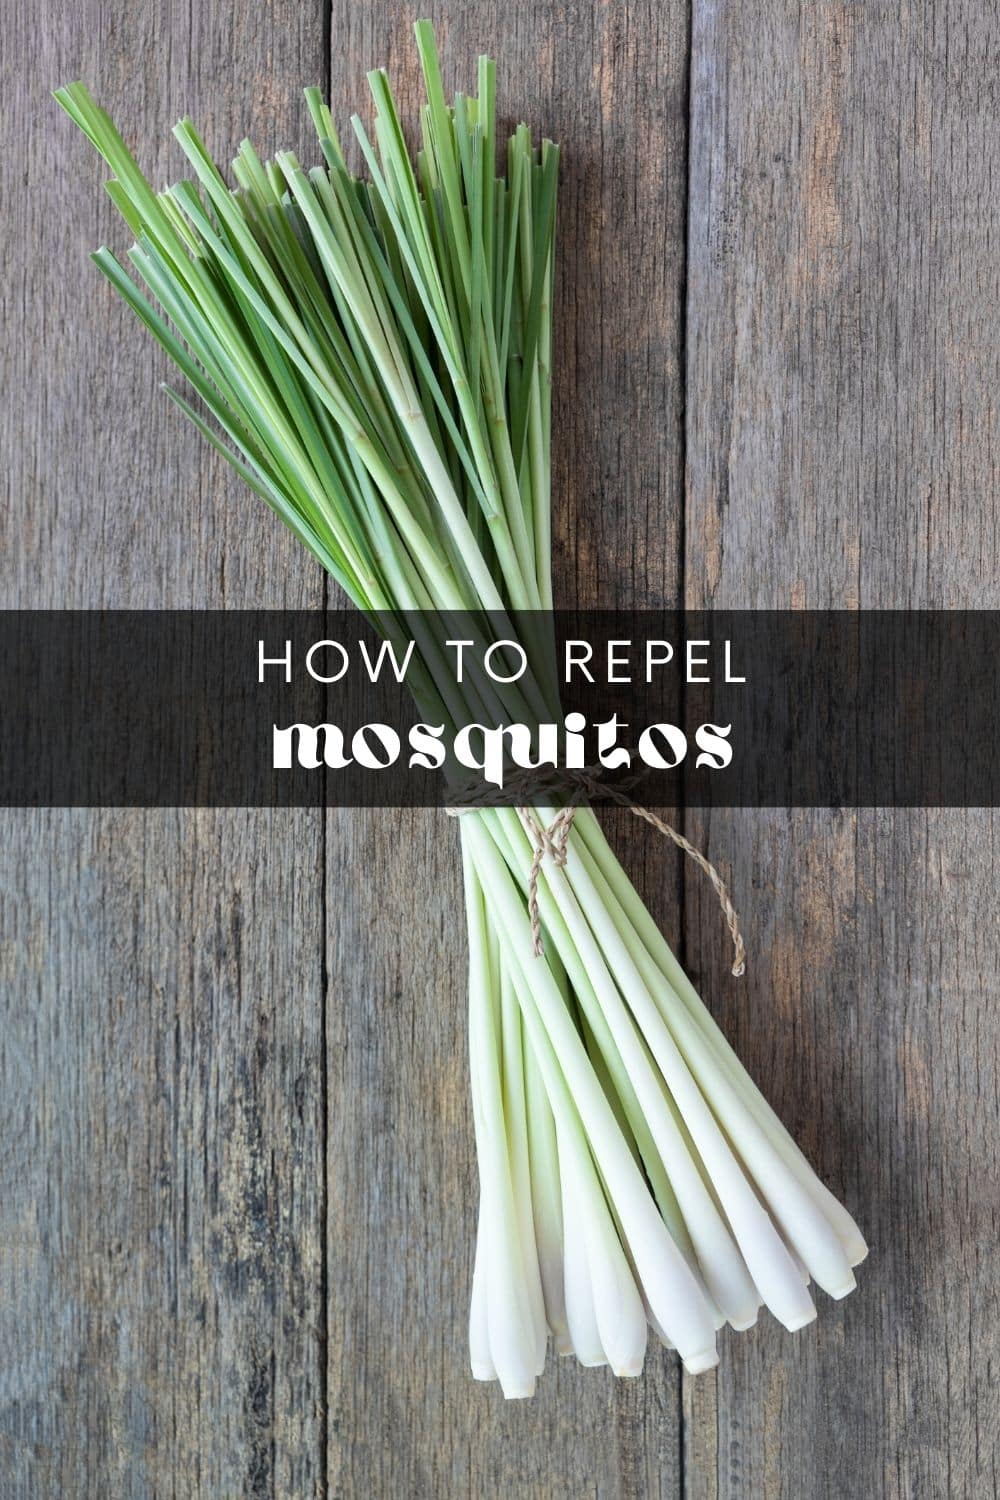 Nothing ruins a summer evening like swatting away mosquitos. From the constant buzzing to itchy bites, mosquitos are a nuisance we all want to avoid. But did you know there are more than repellent sprays and citronella candles out there? Certain plants can act as natural mosquito repellents, offering relief if you prefer to avoid synthetic solutions.